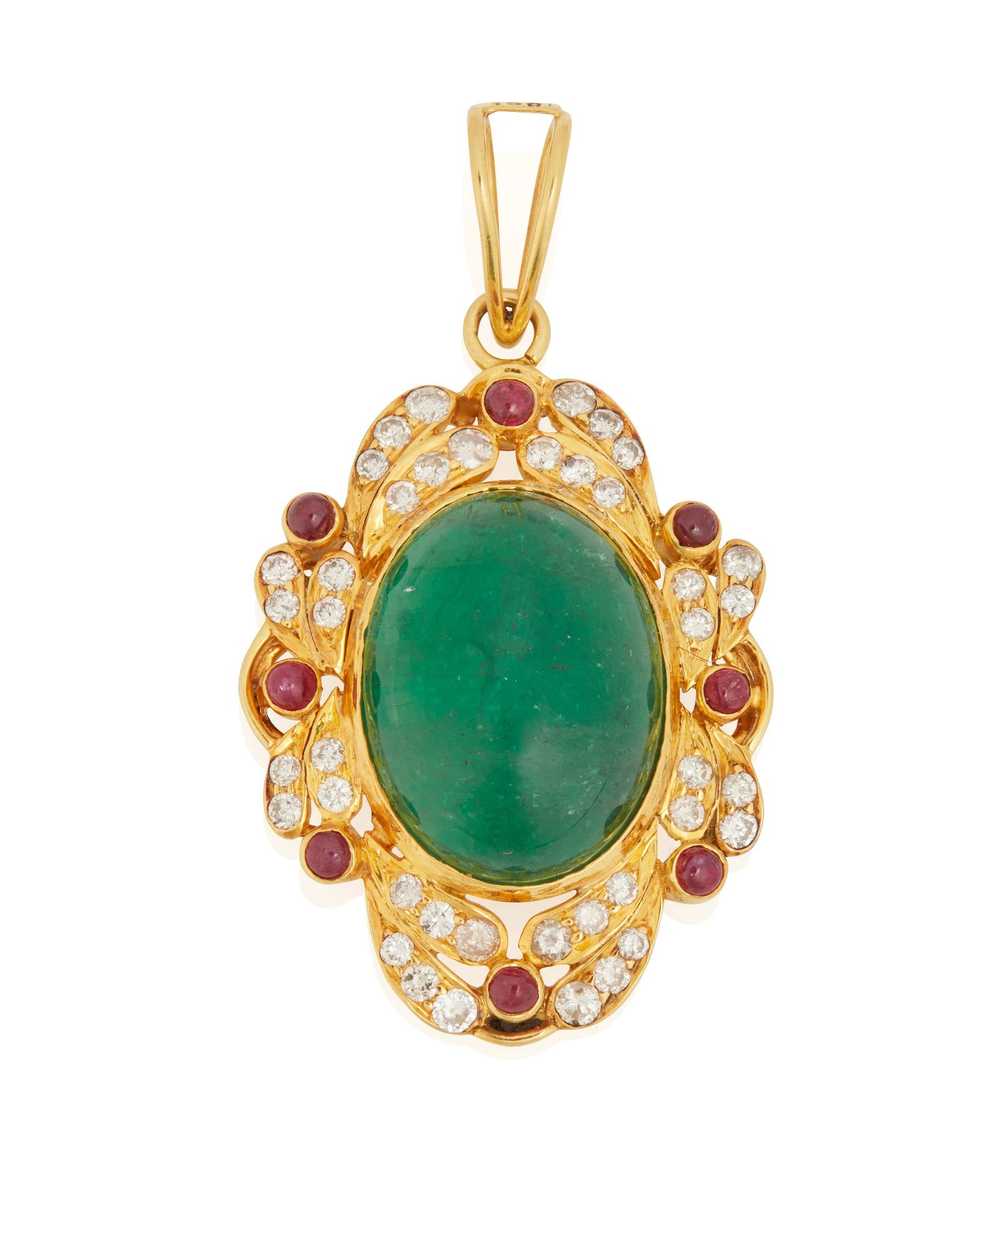 An Emerald, Diamond, Ruby and Gold Pendant - image 1